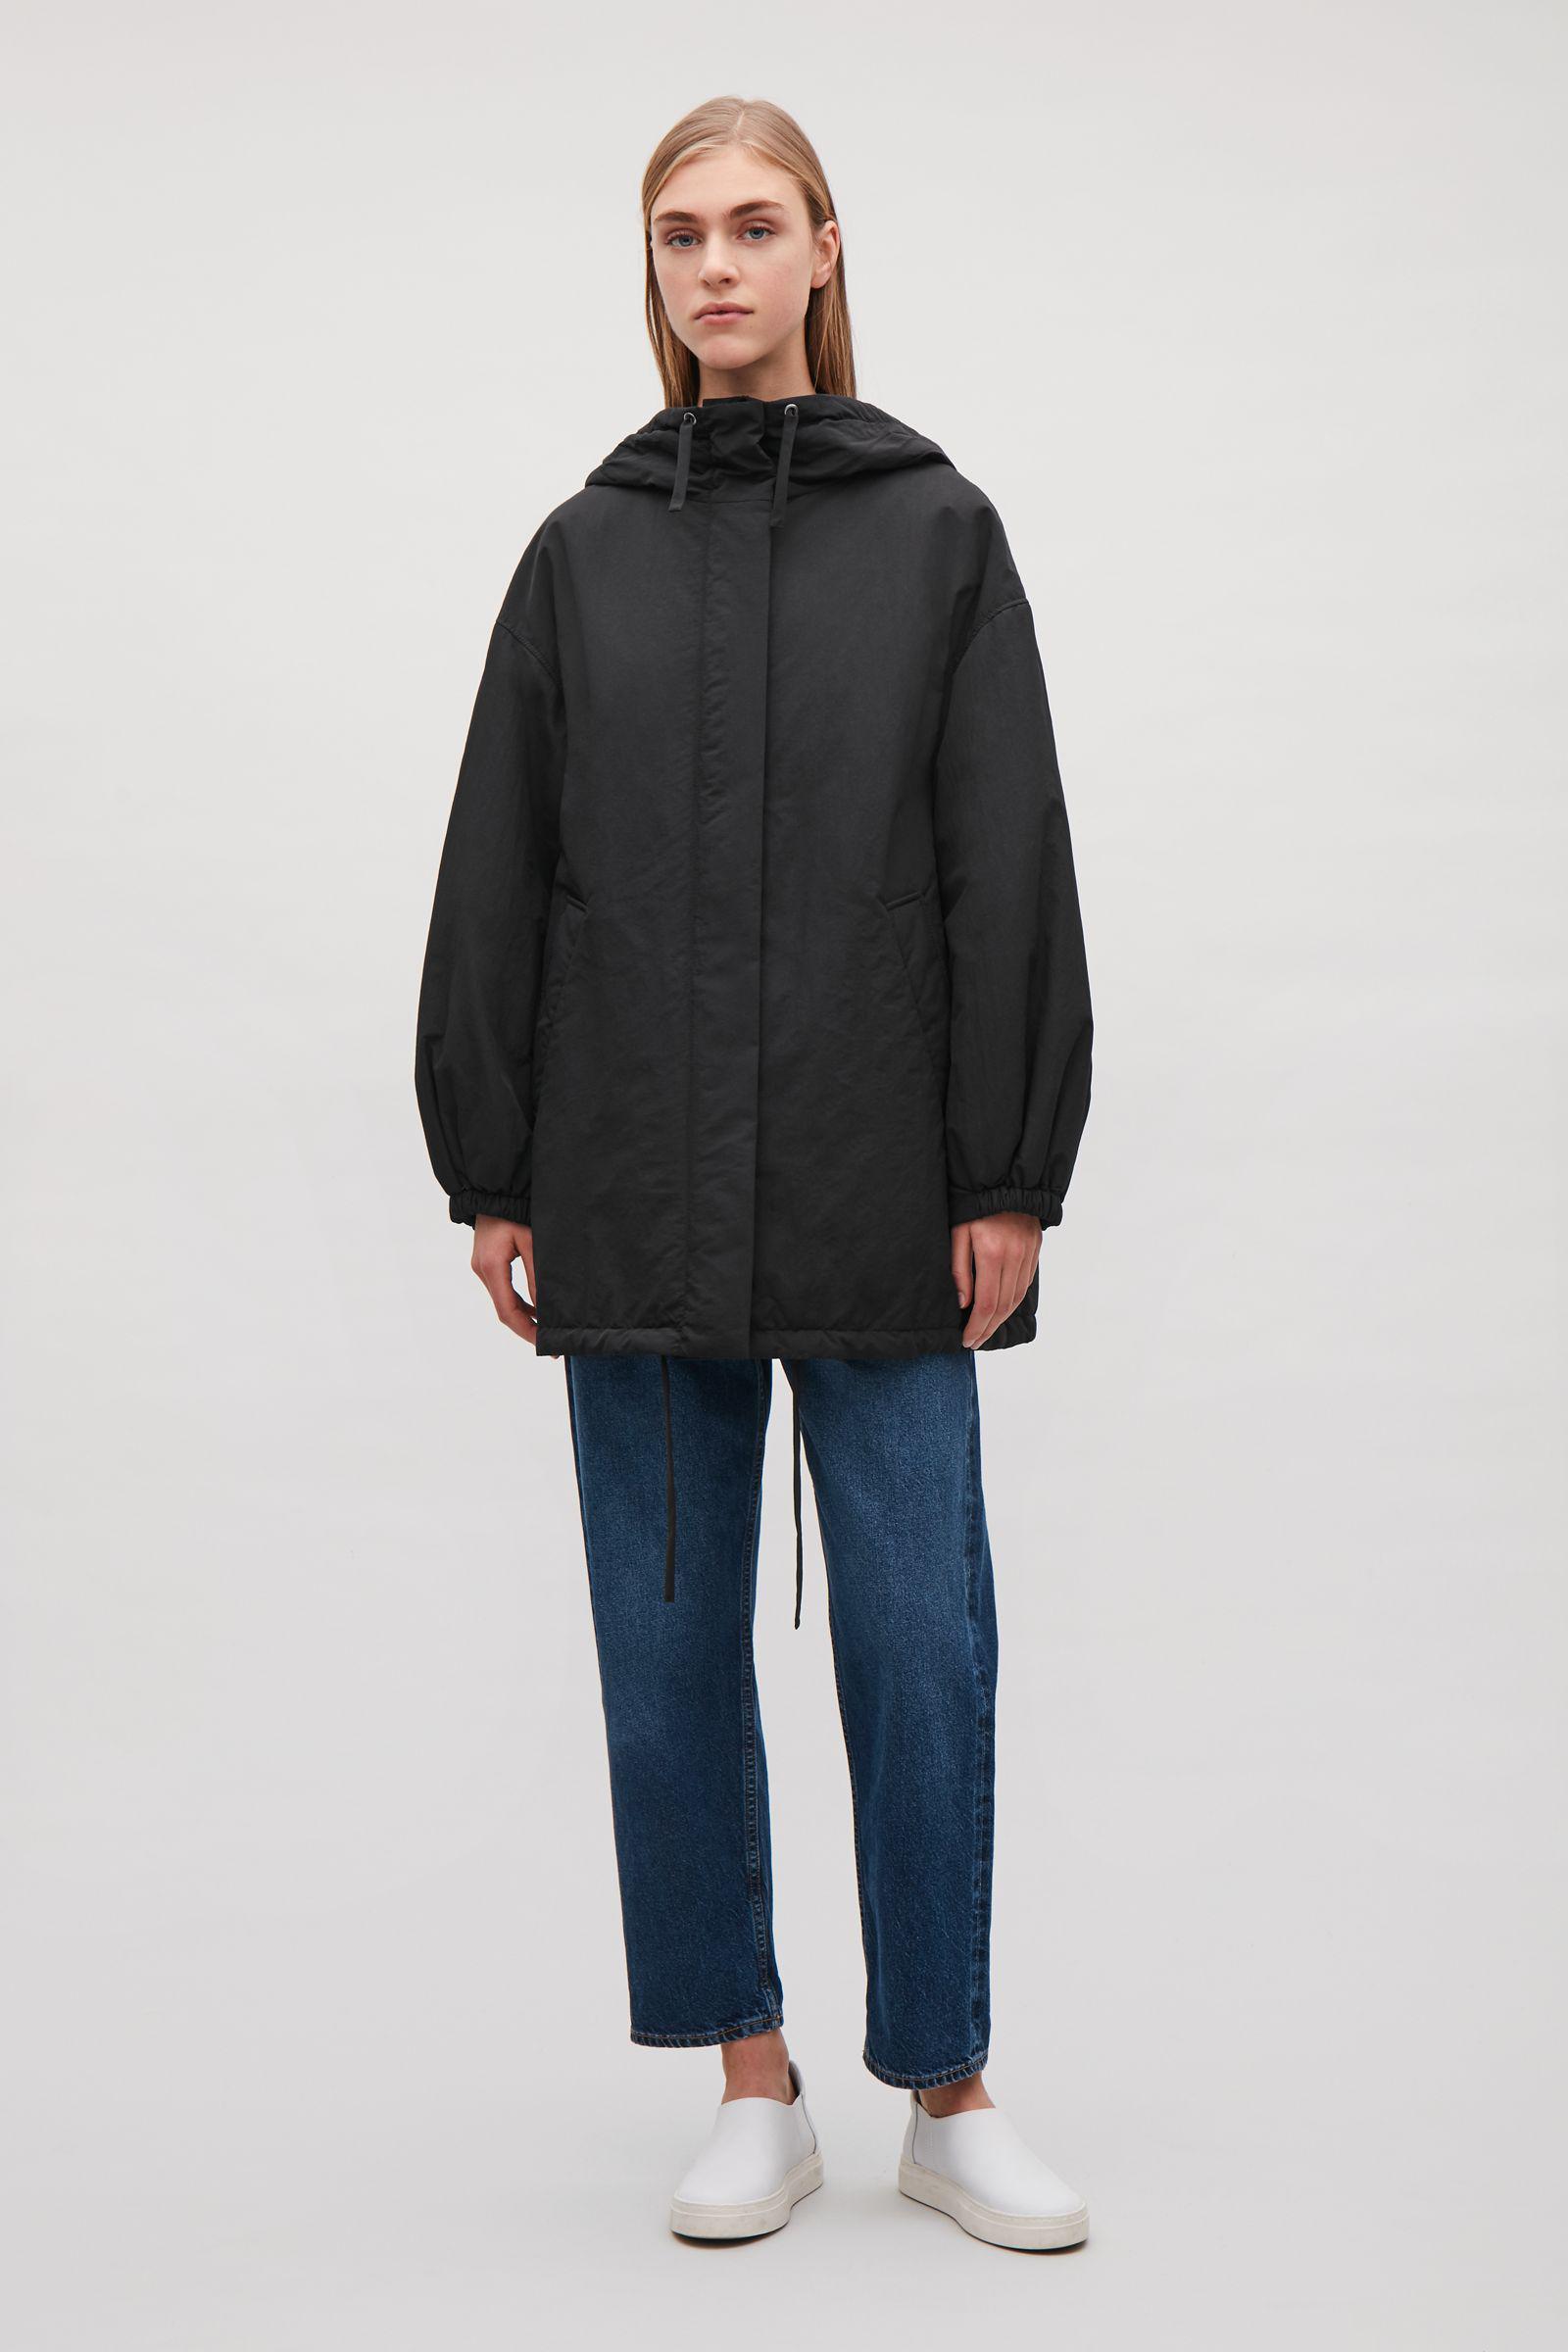 COS Cotton Oversized Padded Parka in Black - Lyst